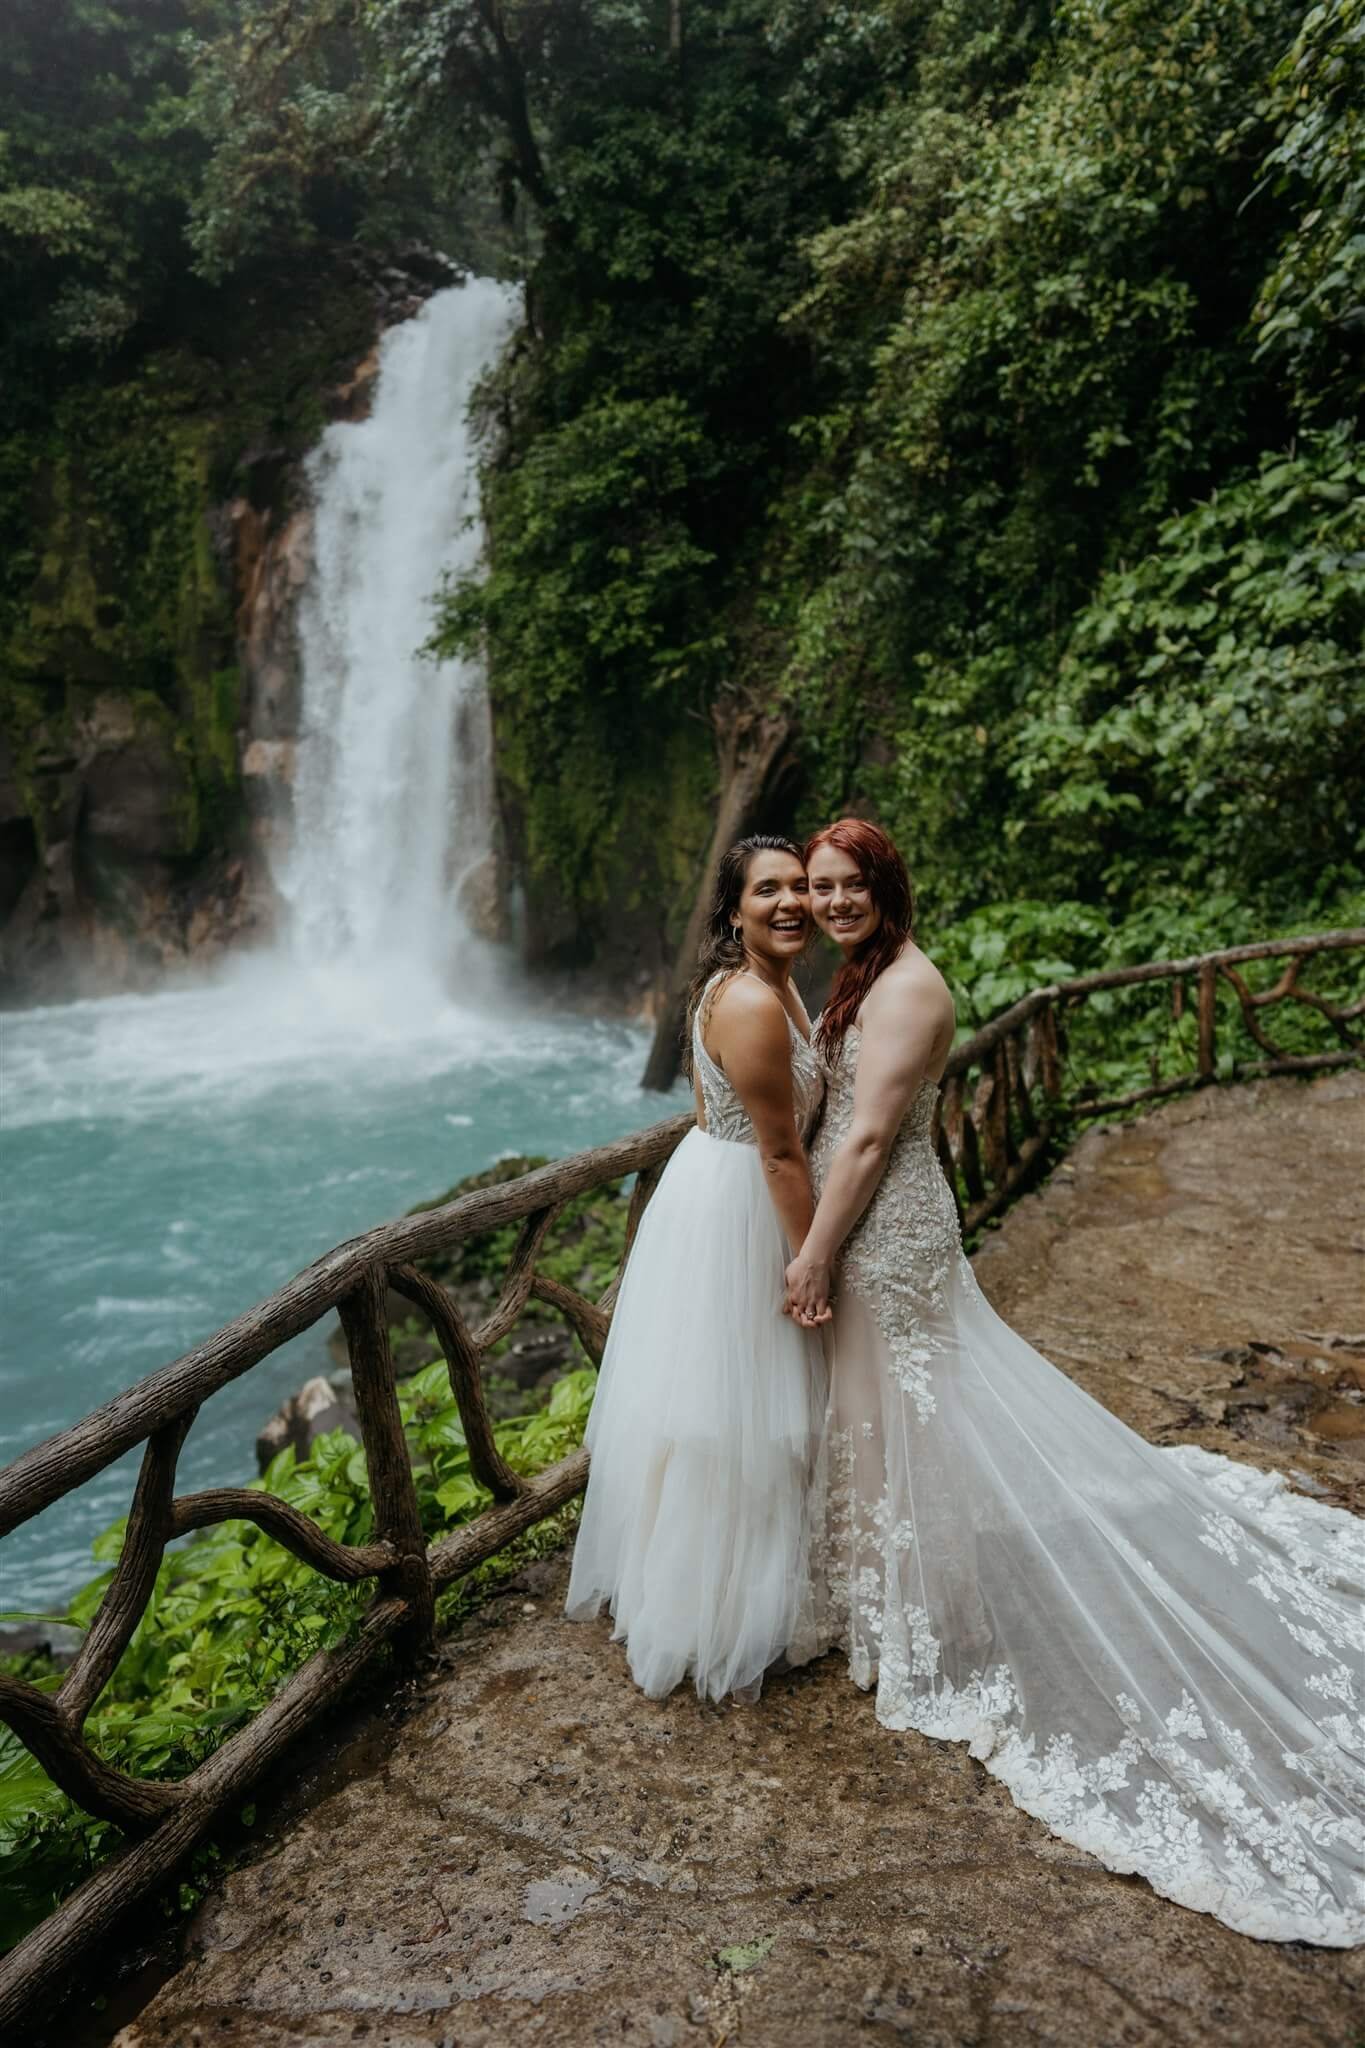 Wedding portraits next to a waterfall at Costa Rica elopement